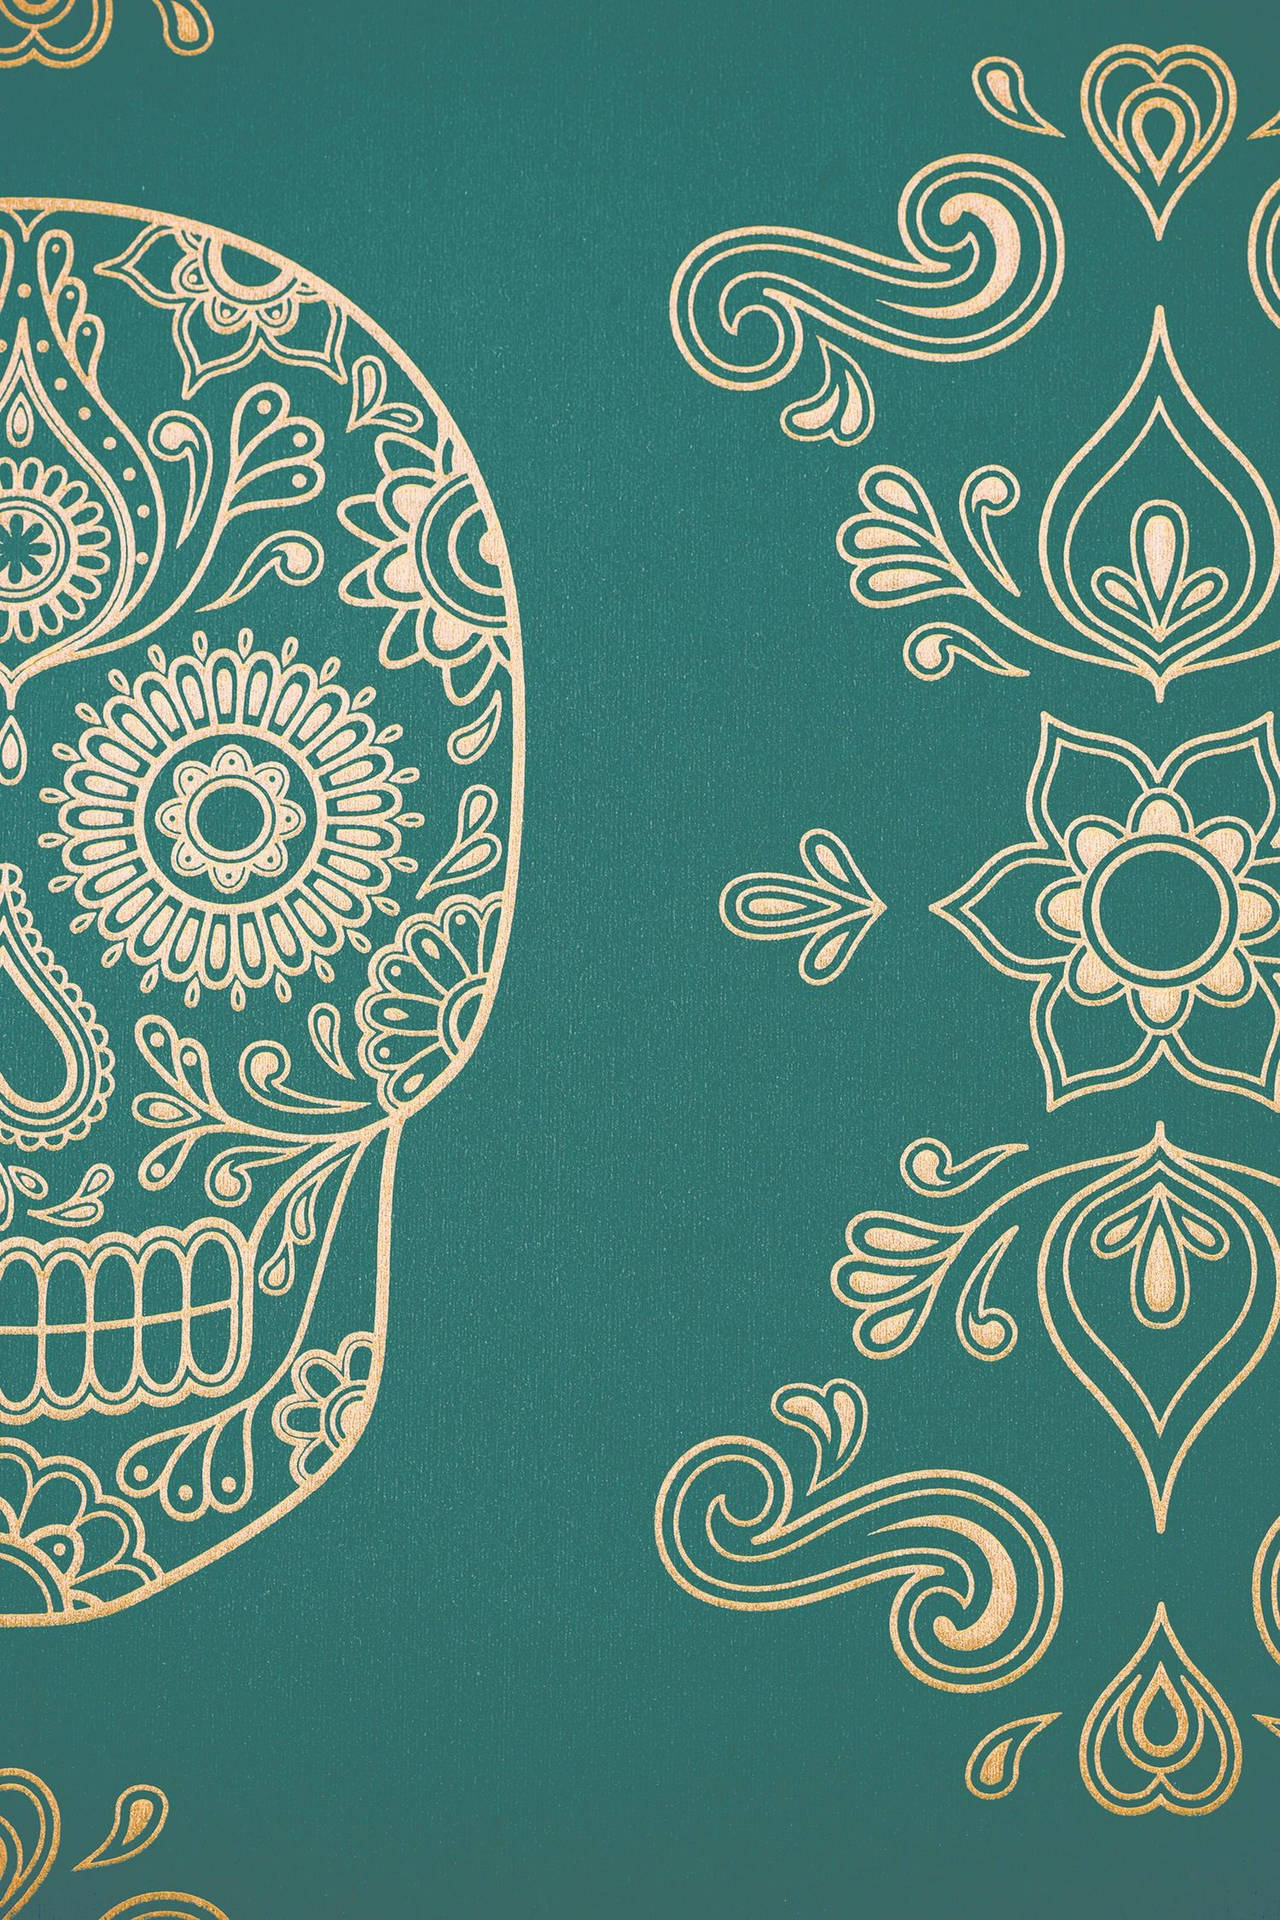 Mexican Stylized Floral Skull Background